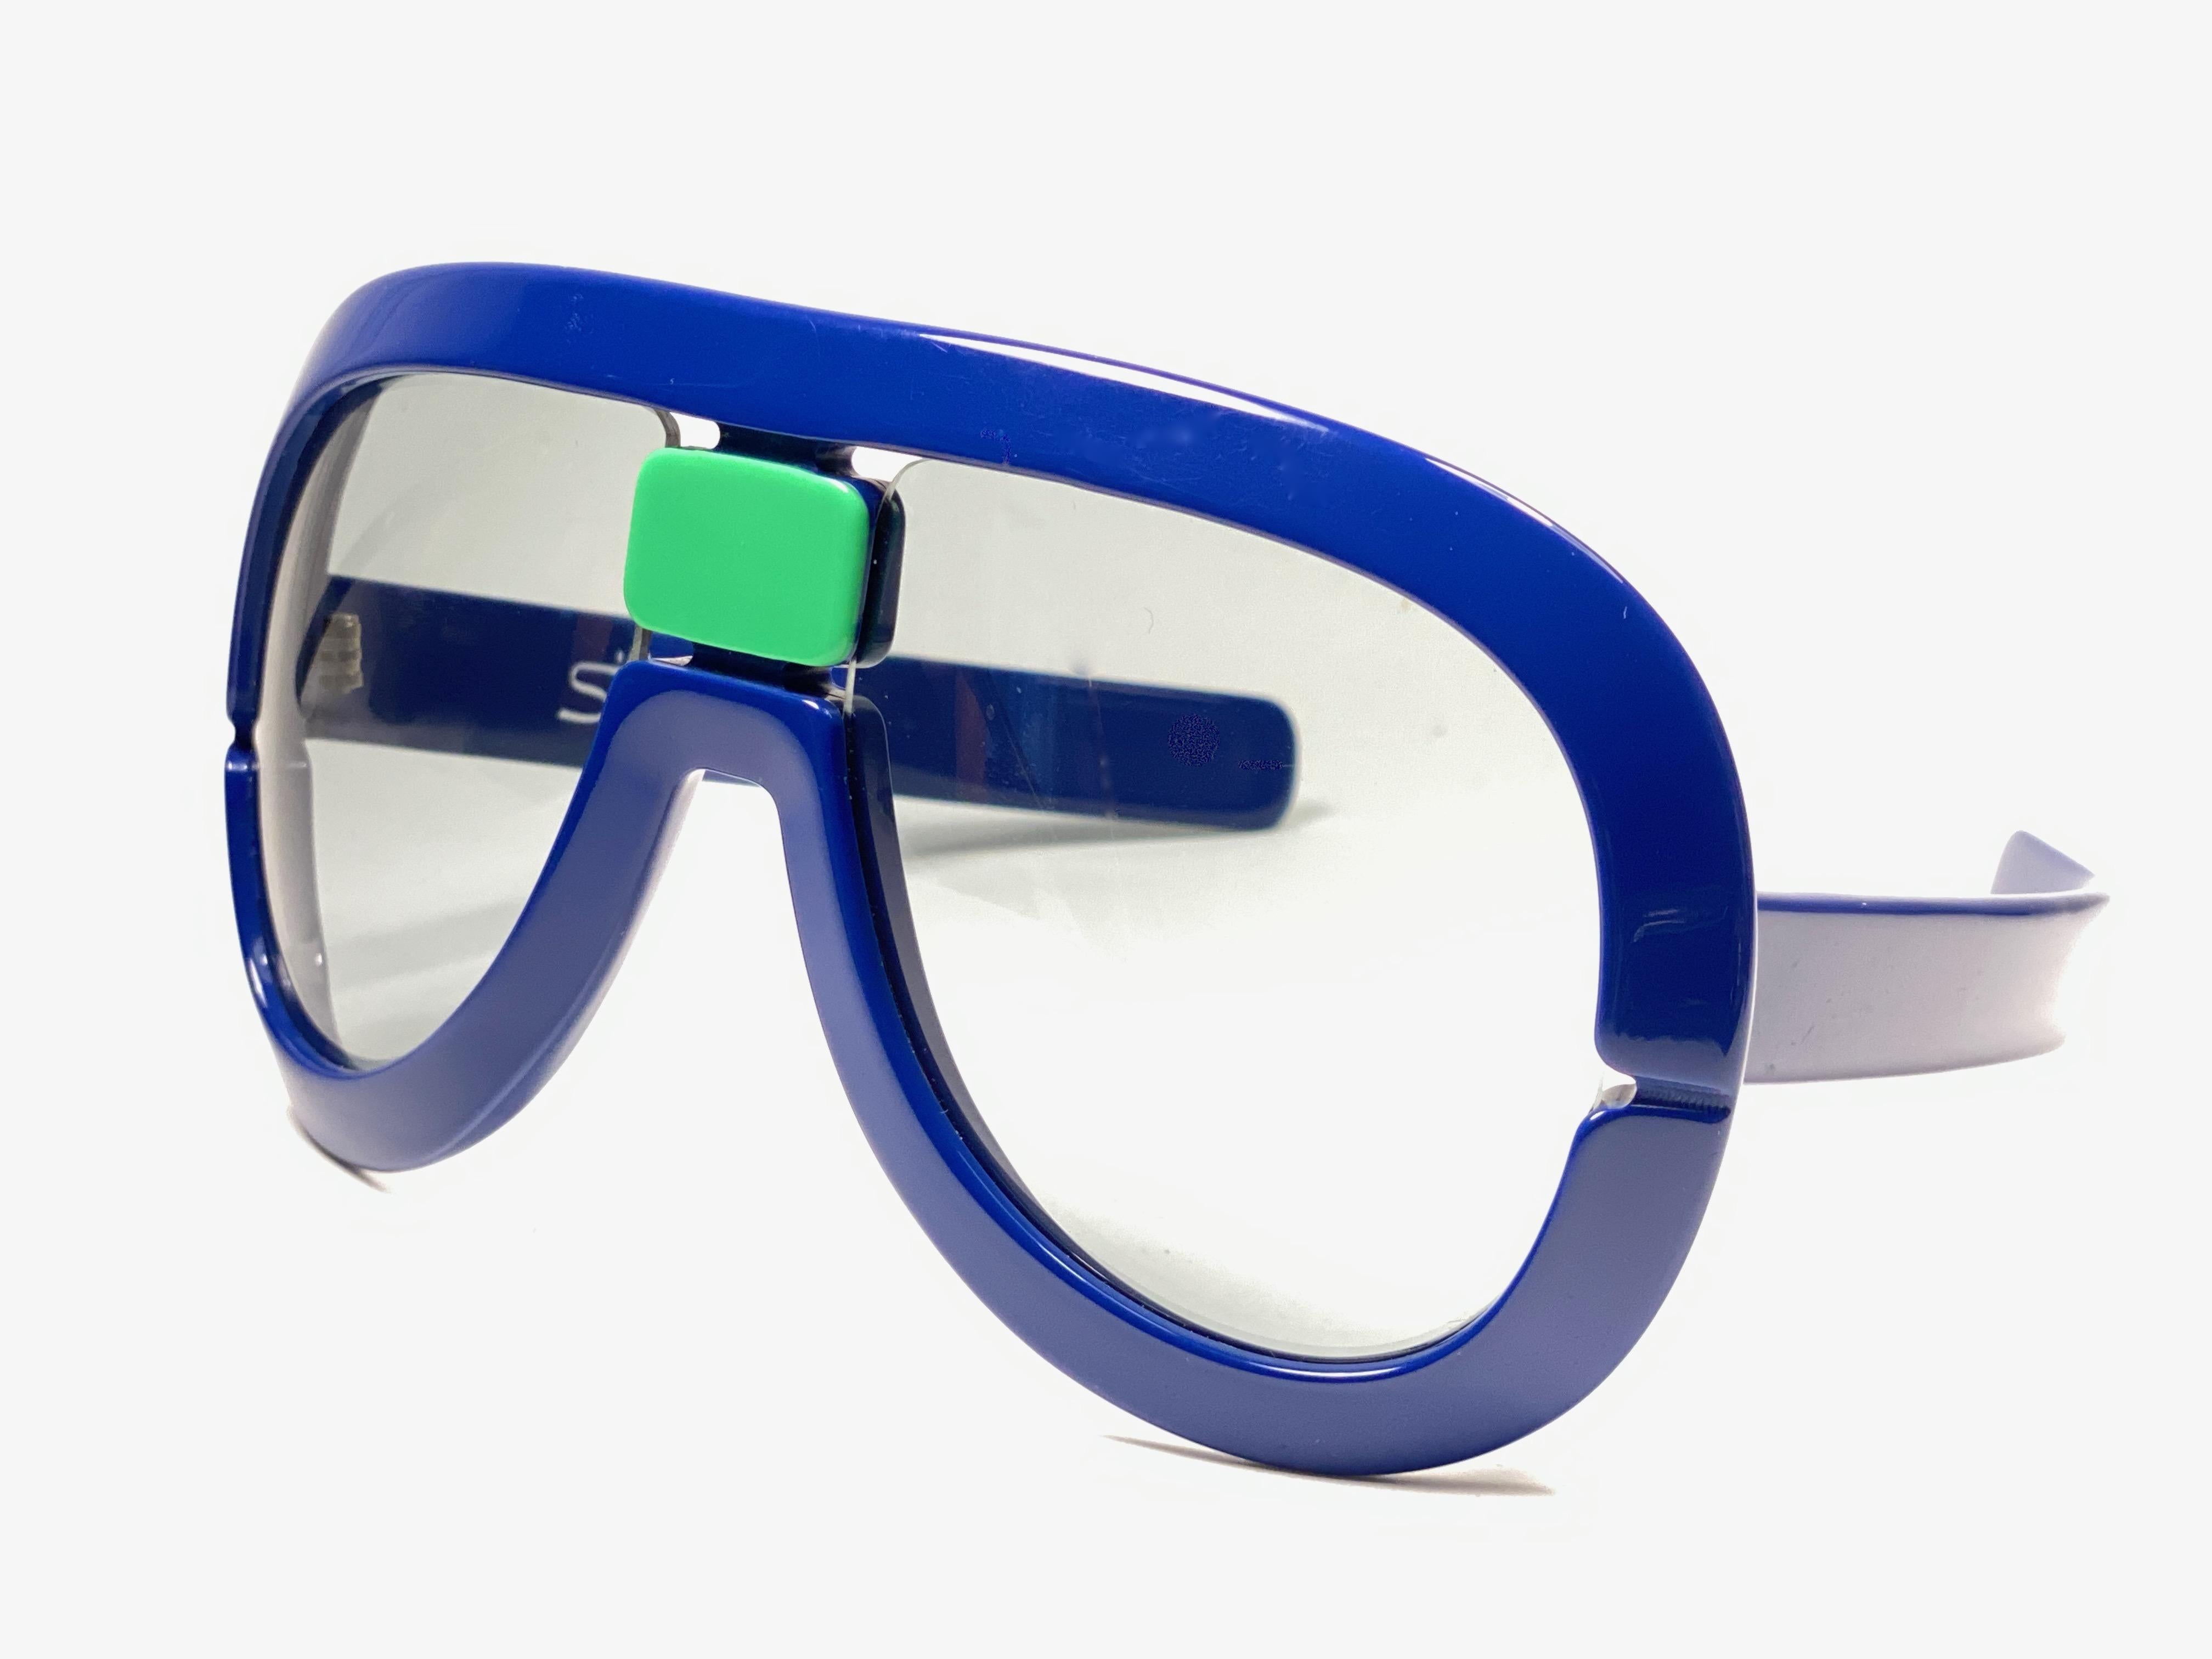 New Vintage Collector Item Silhouette Futura 563 blue thick frame with holding a spotless pair of light lenses.   

Designed by Dora Demmel in 1973, this rare piece is the epitome of avant garde & futuristic eye wear fashion.

Made in Germany in